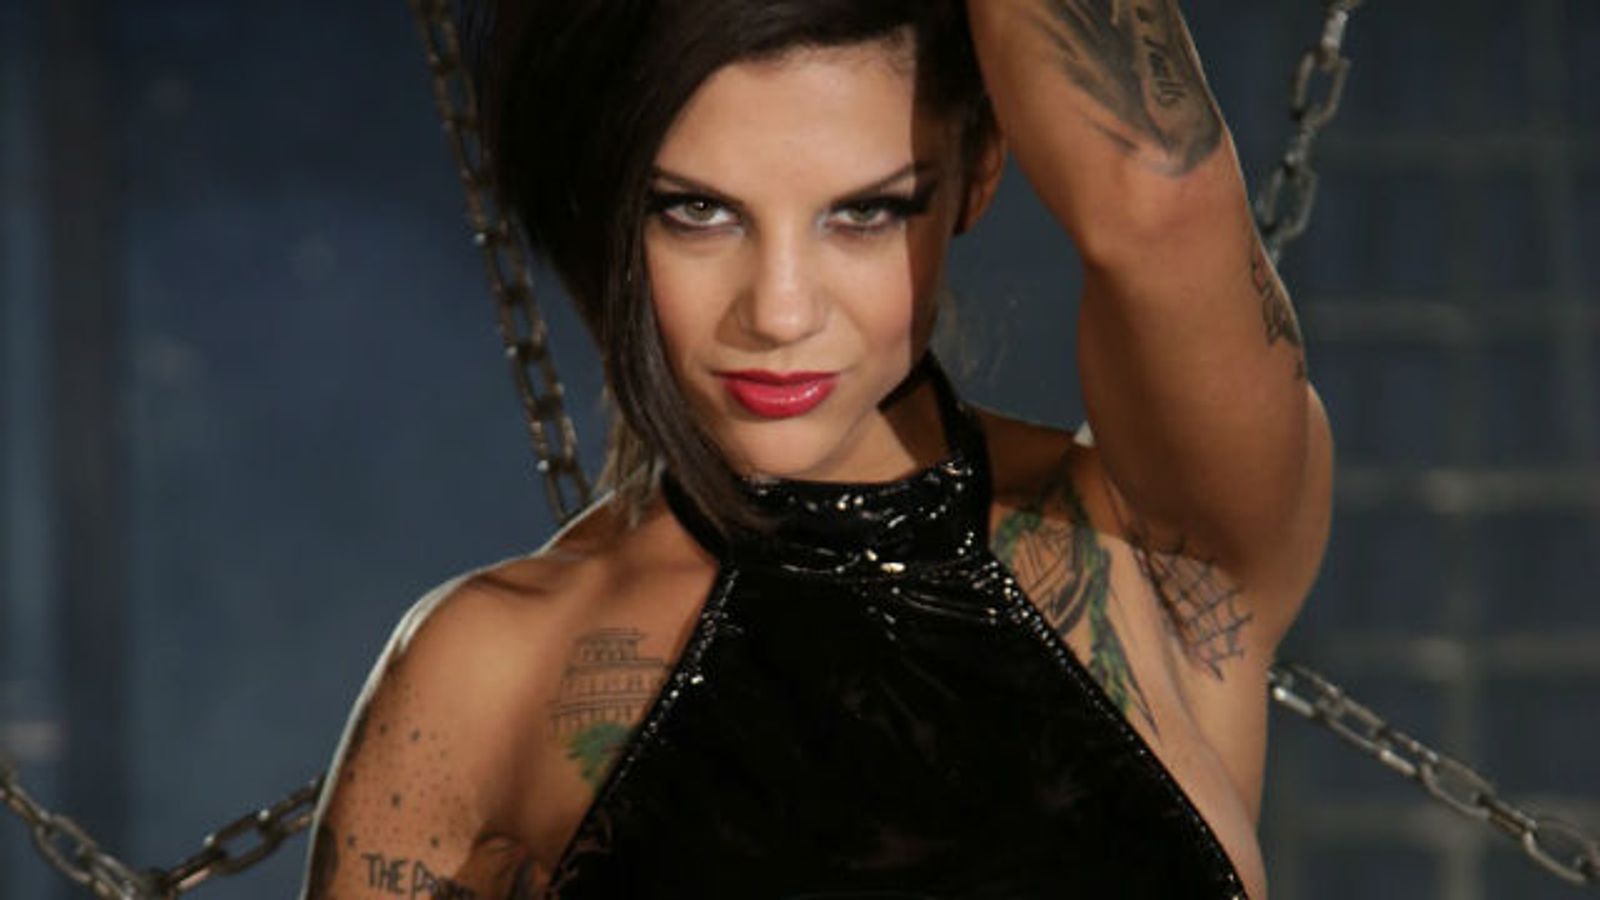 Trailer for Bonnie Rotten’s Directorial Debut Released